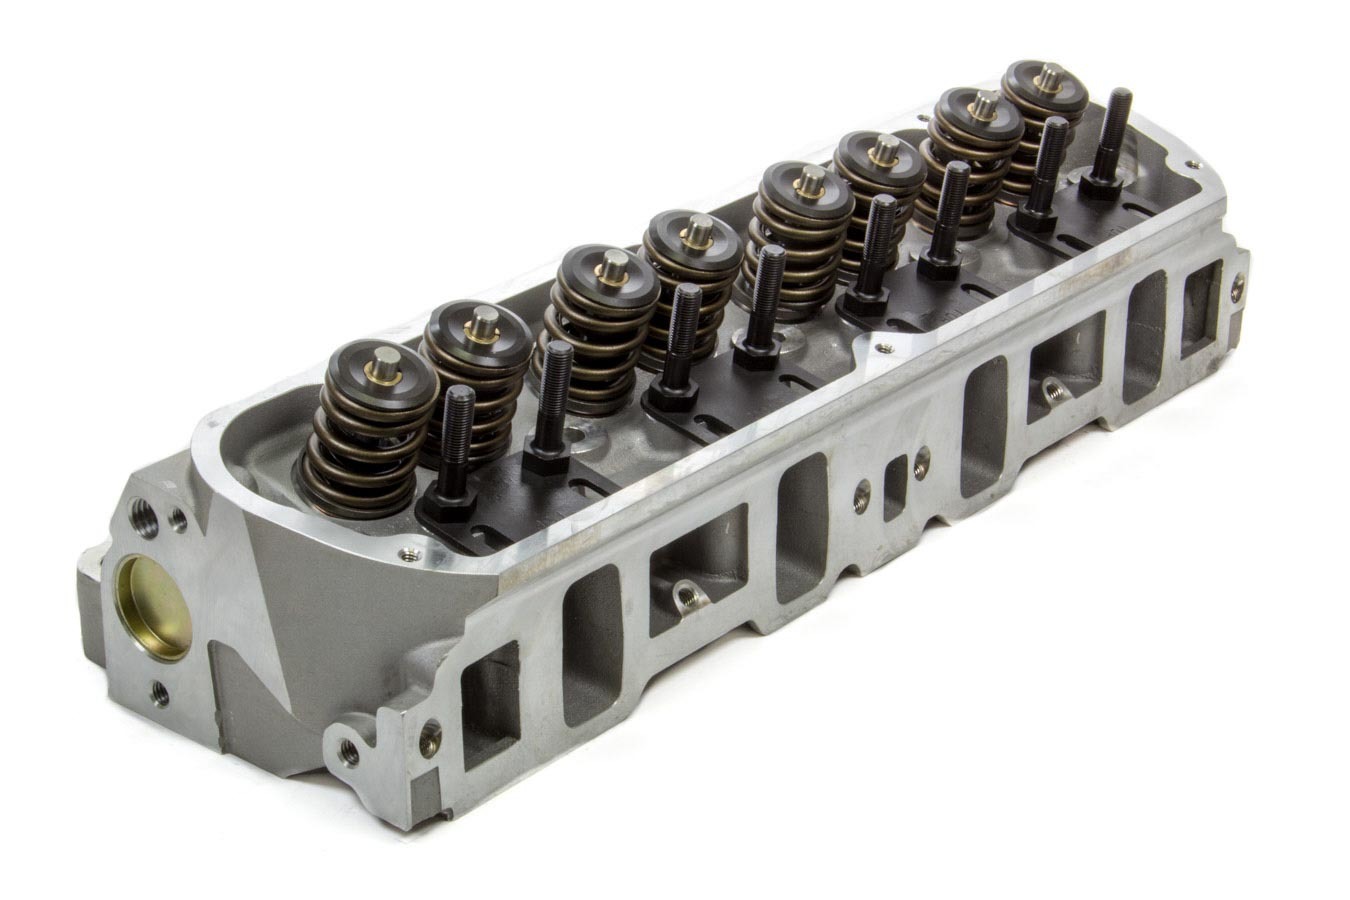 Flo Tek 203505 Cylinder Head, Assembled, 1.940 / 1.550 in Valves, 180 cc Intake, 58 cc Chamber, 1.470 in Springs, Aluminum, Small Block Ford, Each